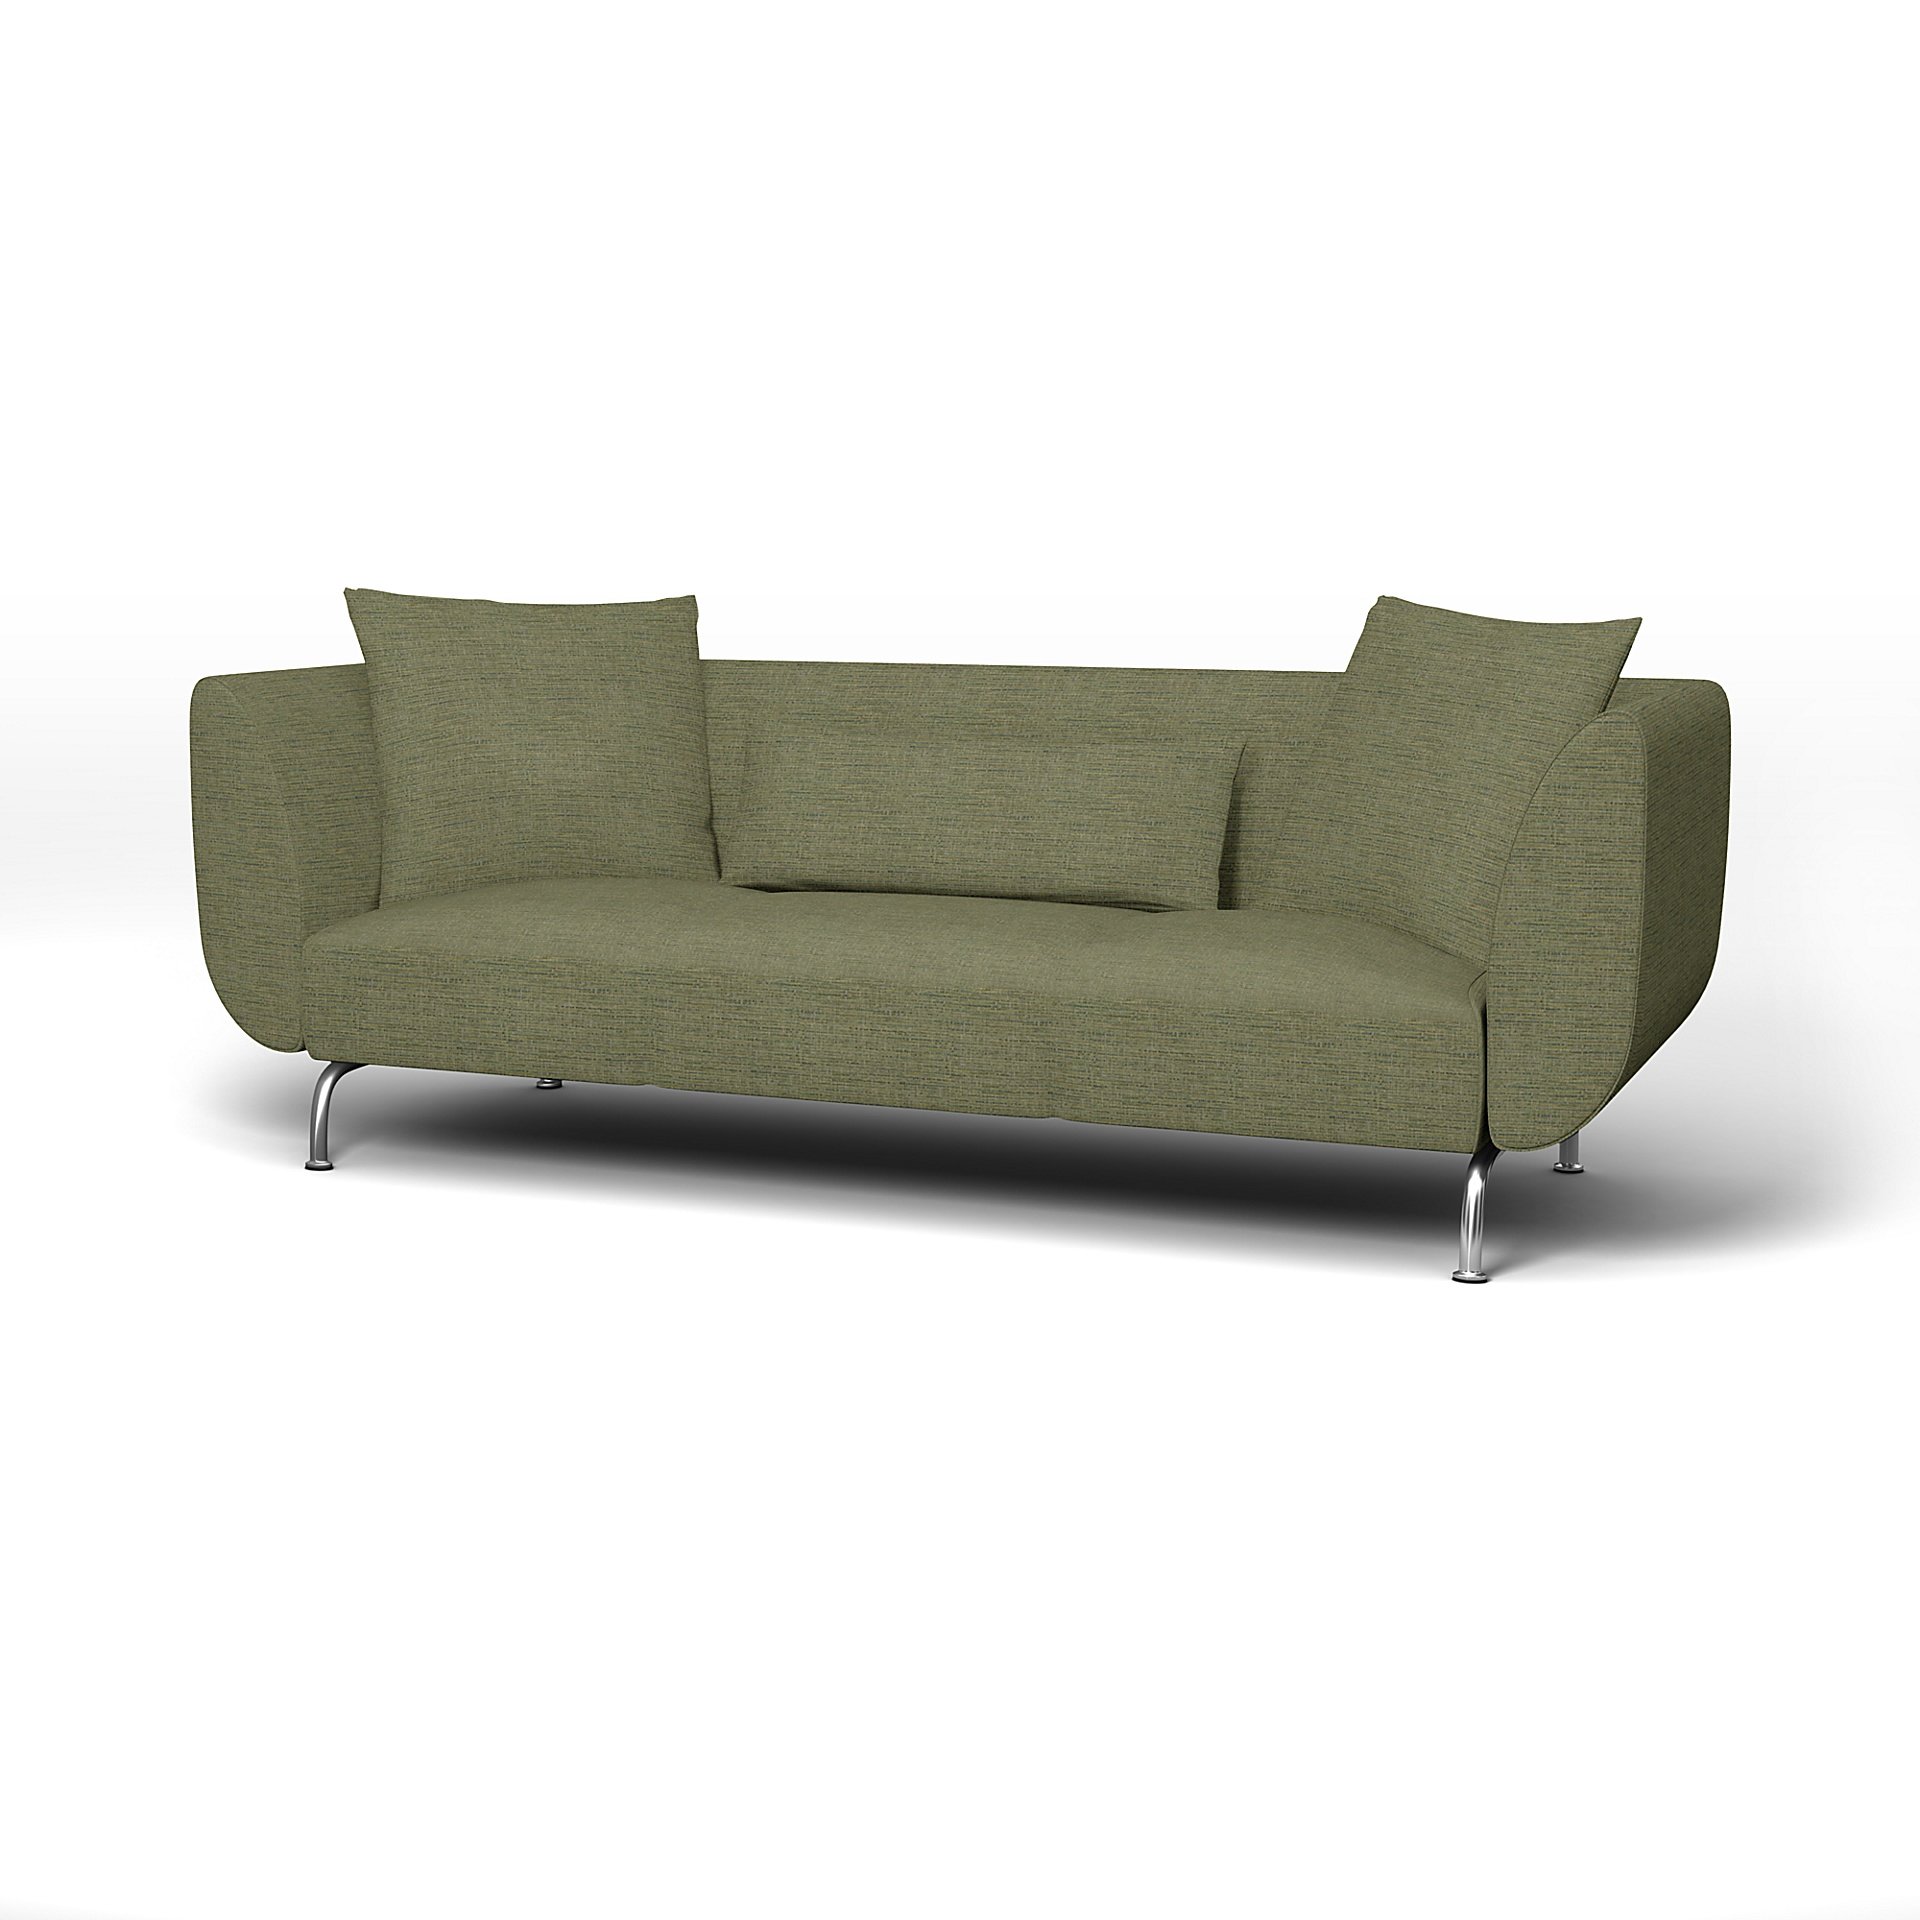 IKEA - Stromstad 3 Seater Sofa Cover, Meadow Green, Boucle & Texture - Bemz